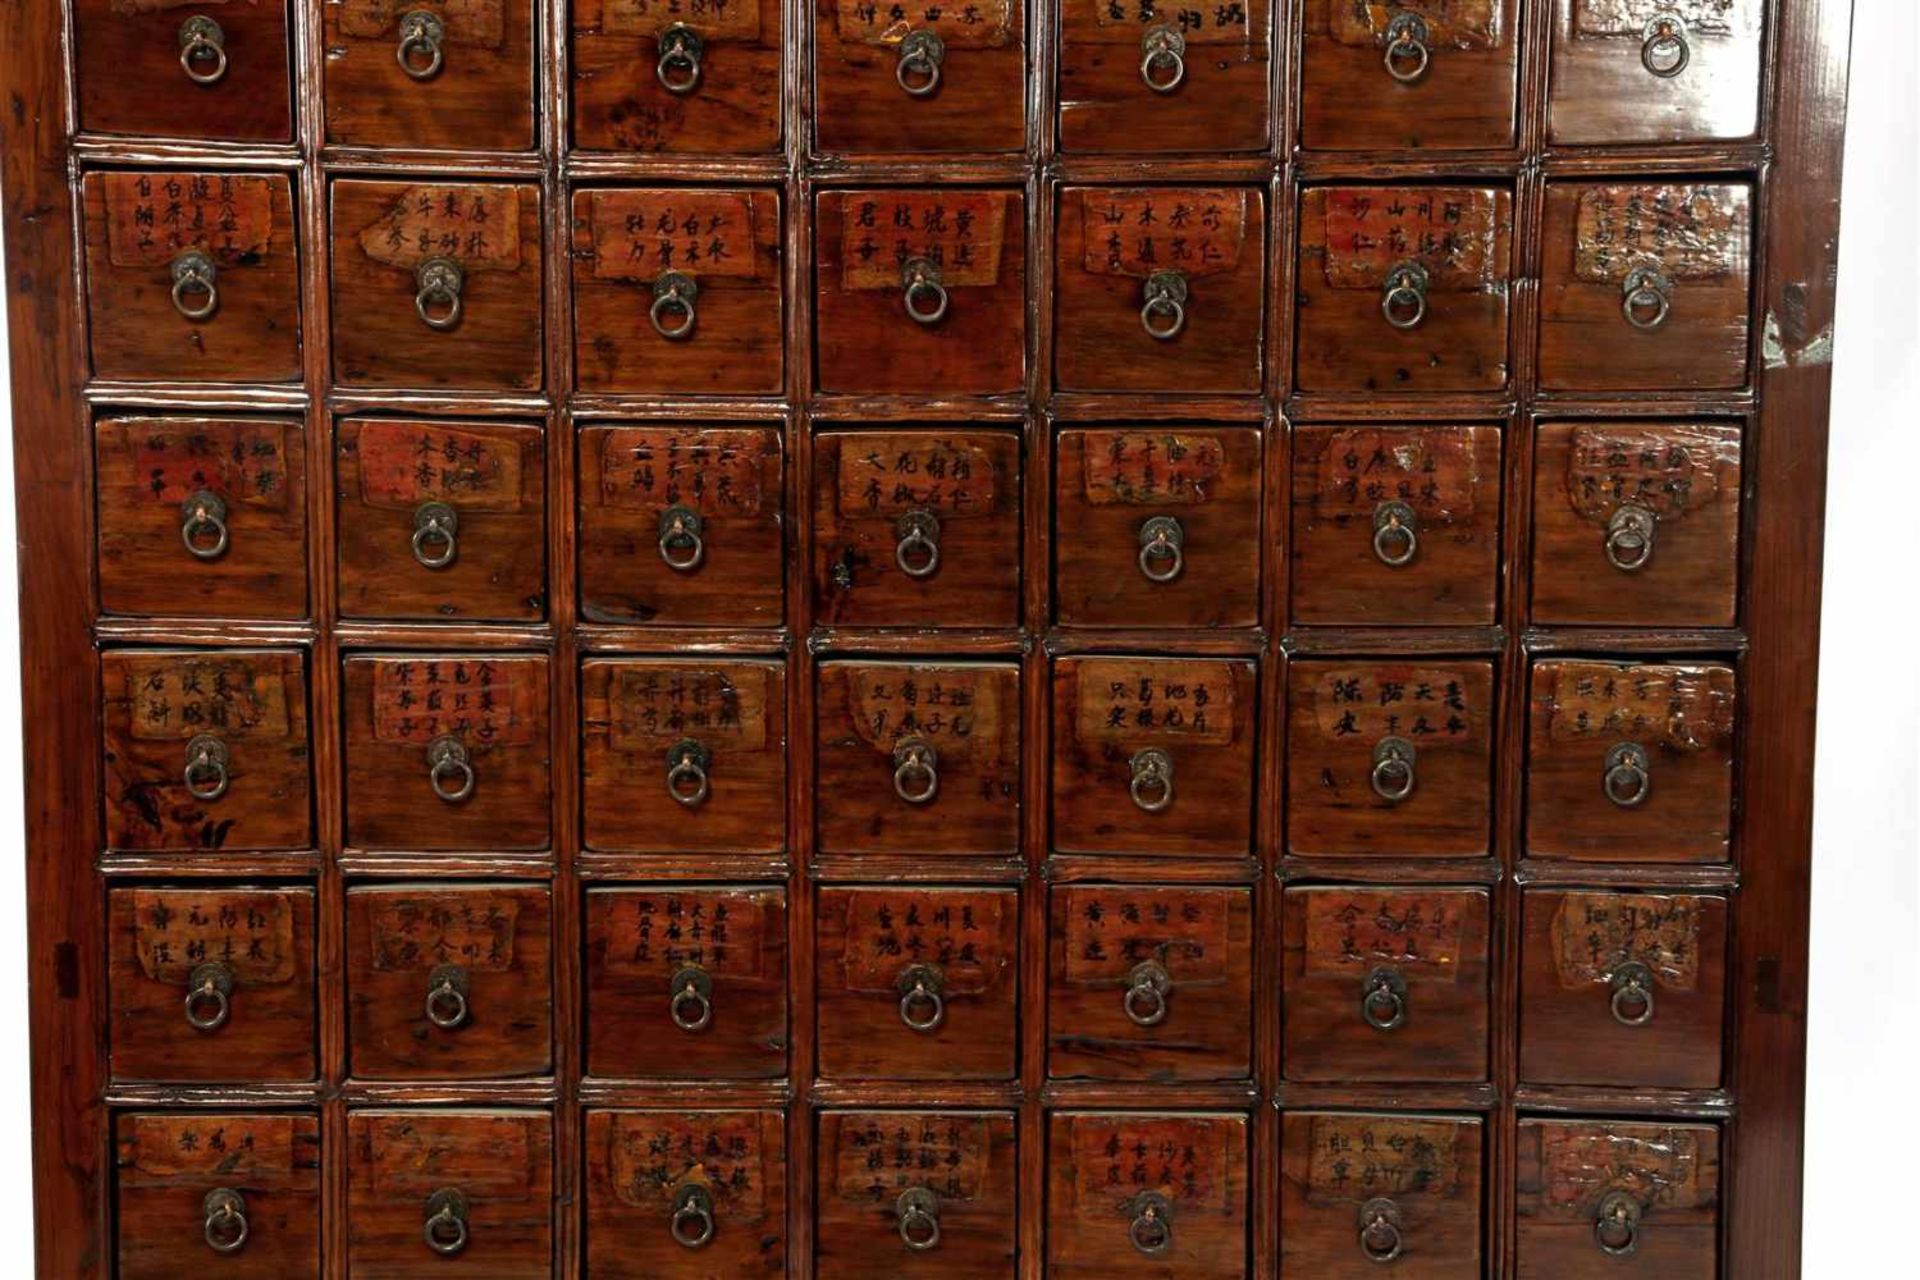 Teak Chinese chest of drawers with inscriptions, 155 cm high, 115 cm wide and 45 cm deep - Image 2 of 2